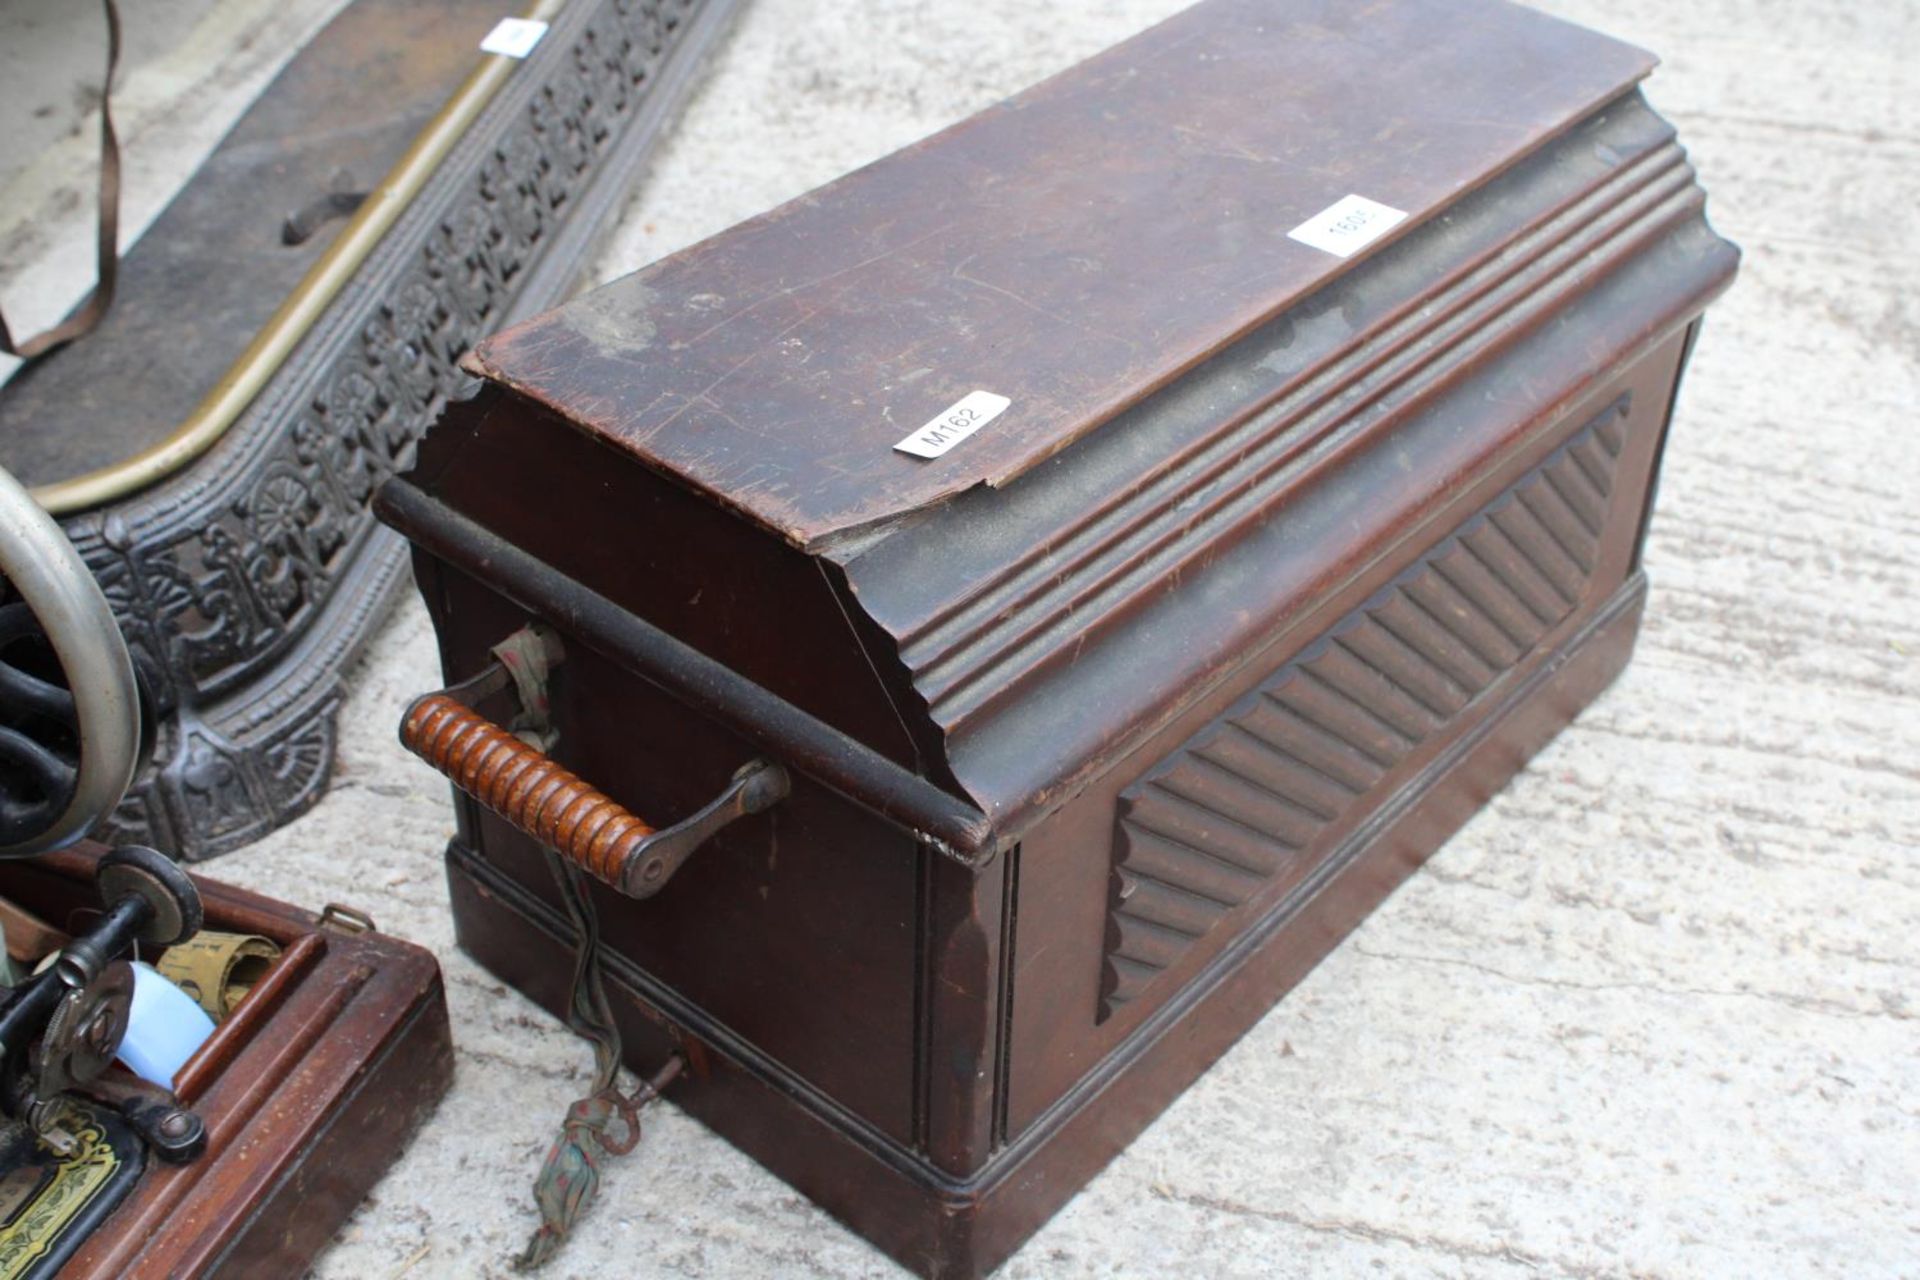 A VINTAGE SINGER SEWING MACHINE WITH WOODEN CARRY CASE - Image 3 of 4